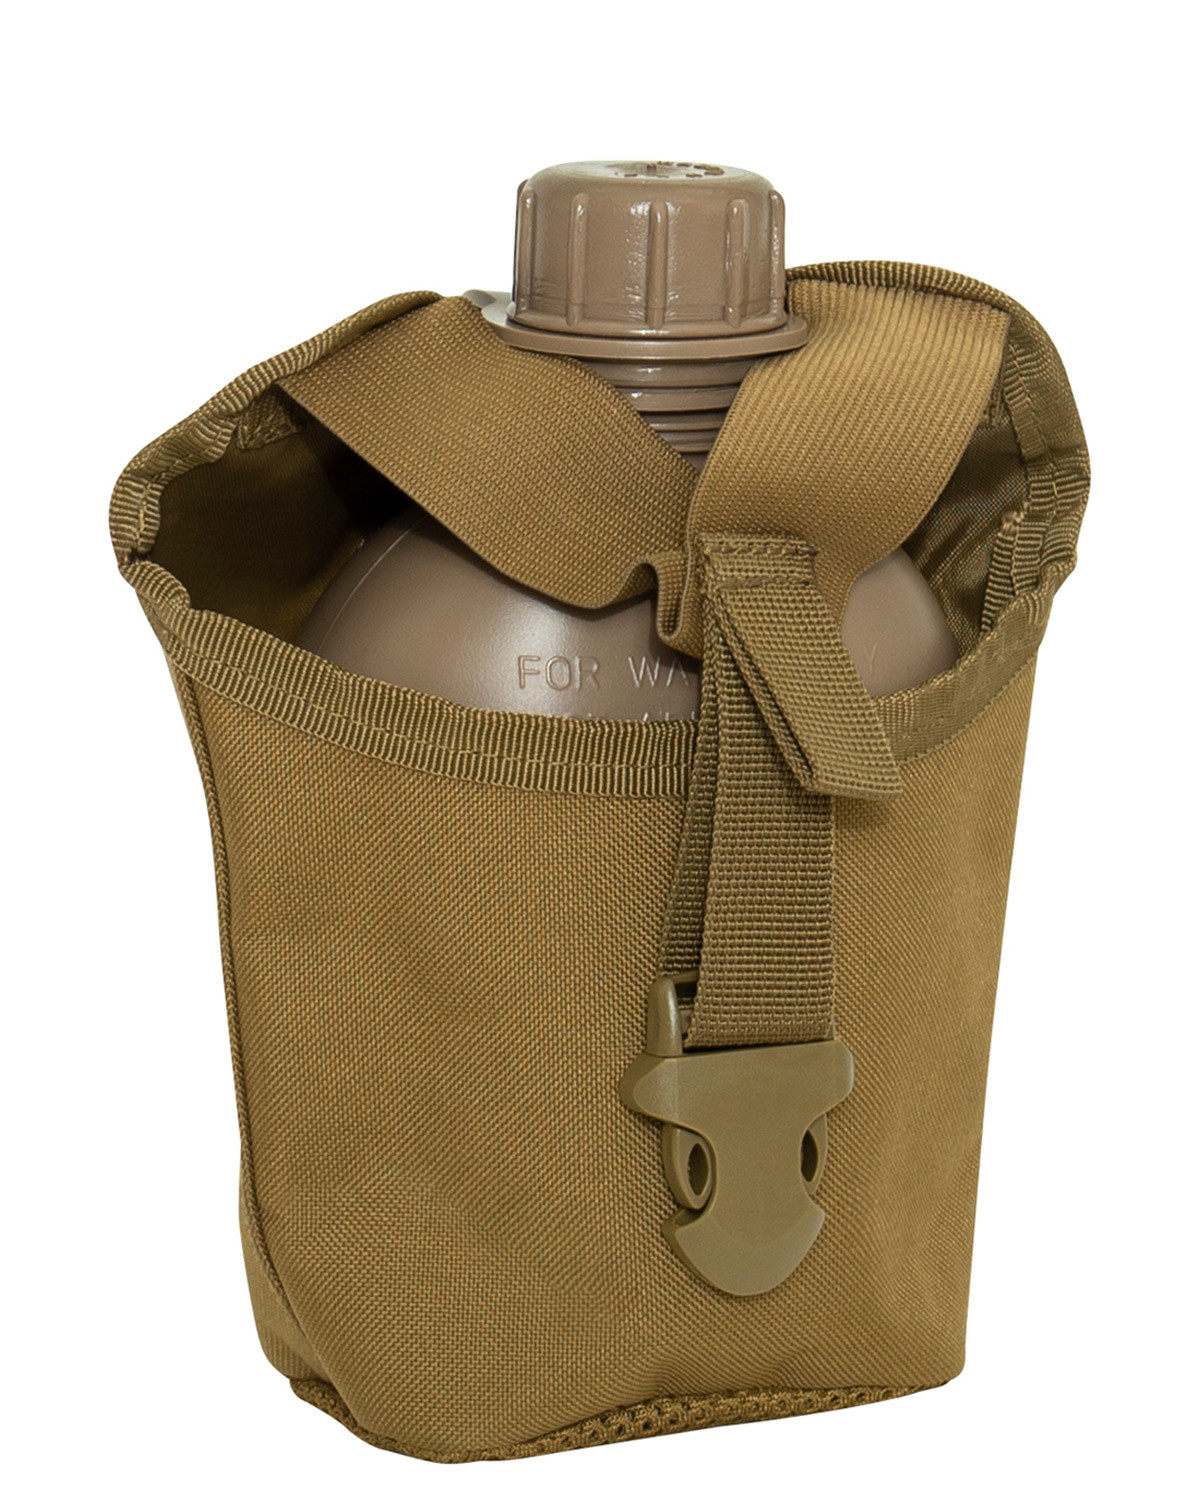 #3 - Rothco MOLLE Drikkedunk Etui 1 Liter (Coyote Brun, One Size)